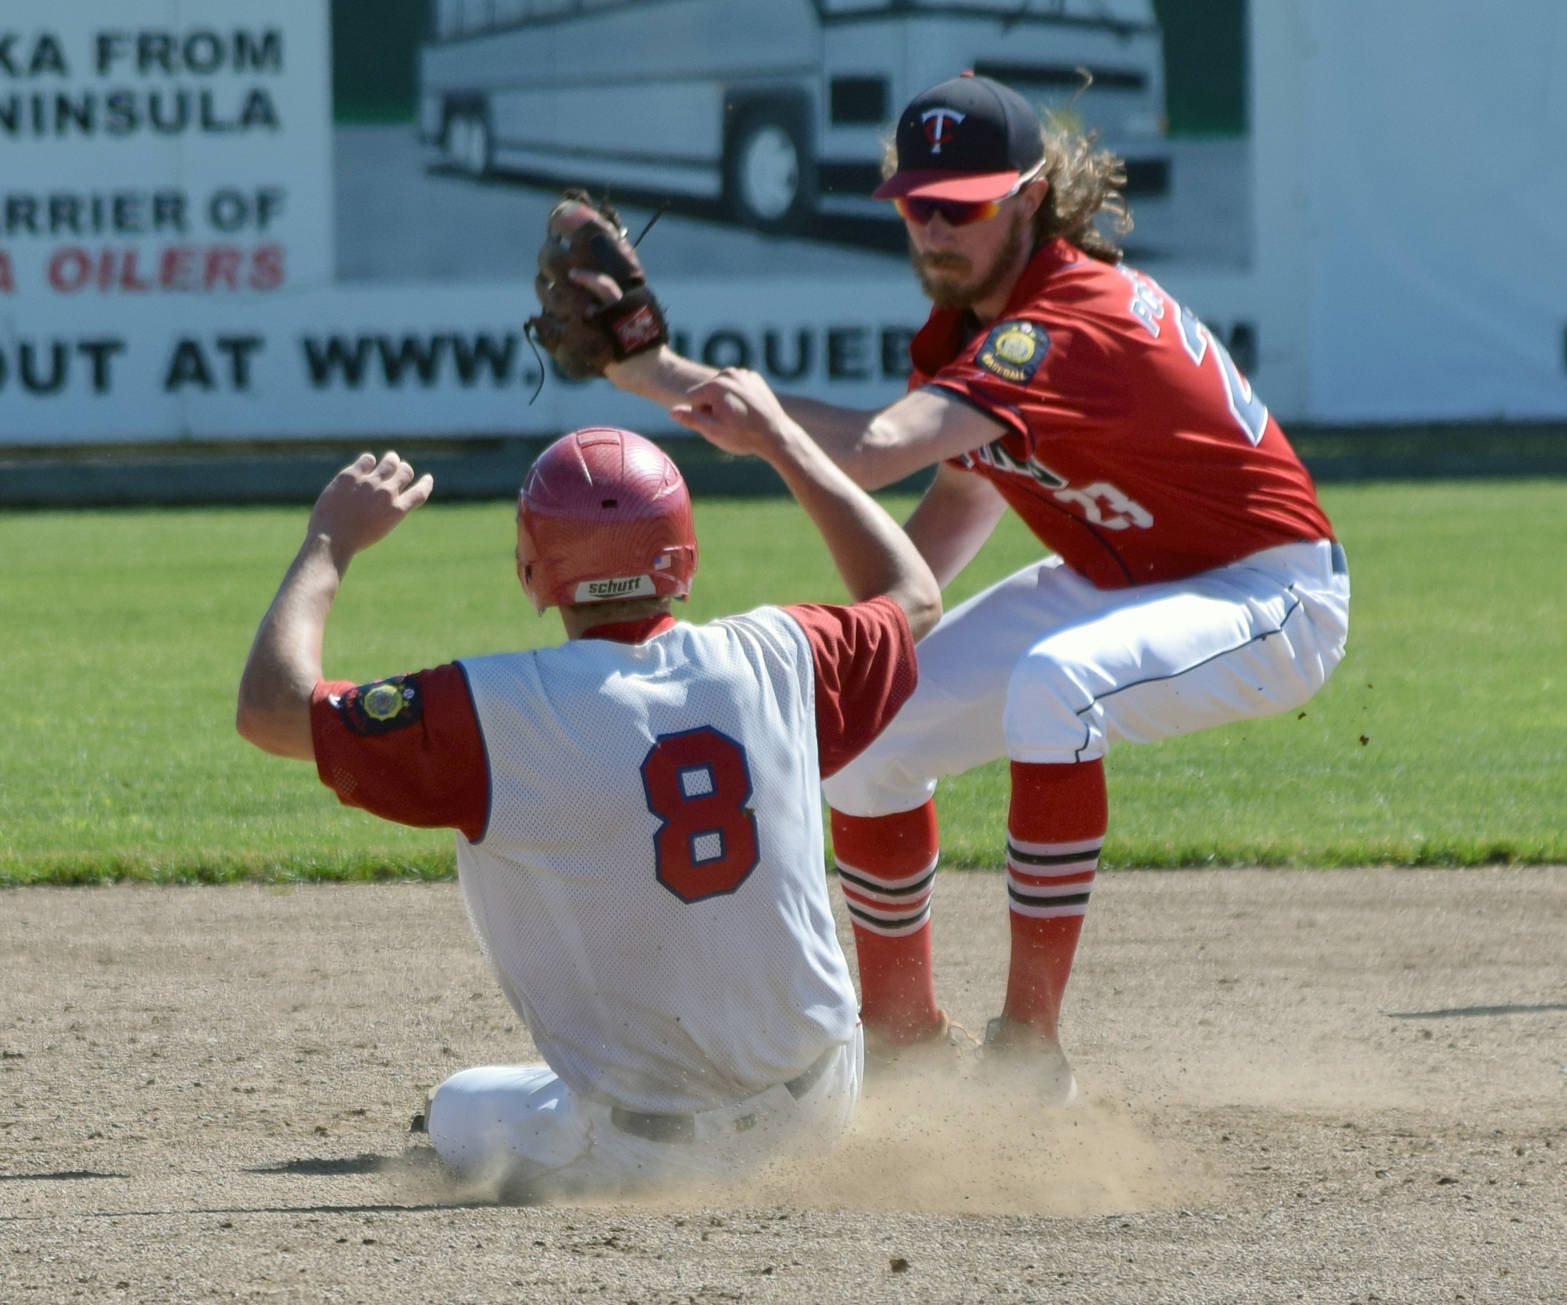 Twins second baseman David Michael tags out Nick Thimsen of Excelsior Post 259 of Minneapolis on a stolen base attempt Tuesday, July 3, 2018, at Coral Seymour Memorial Park in Kenai. (Photo by Jeff Helminiak/Peninsula Clarion)